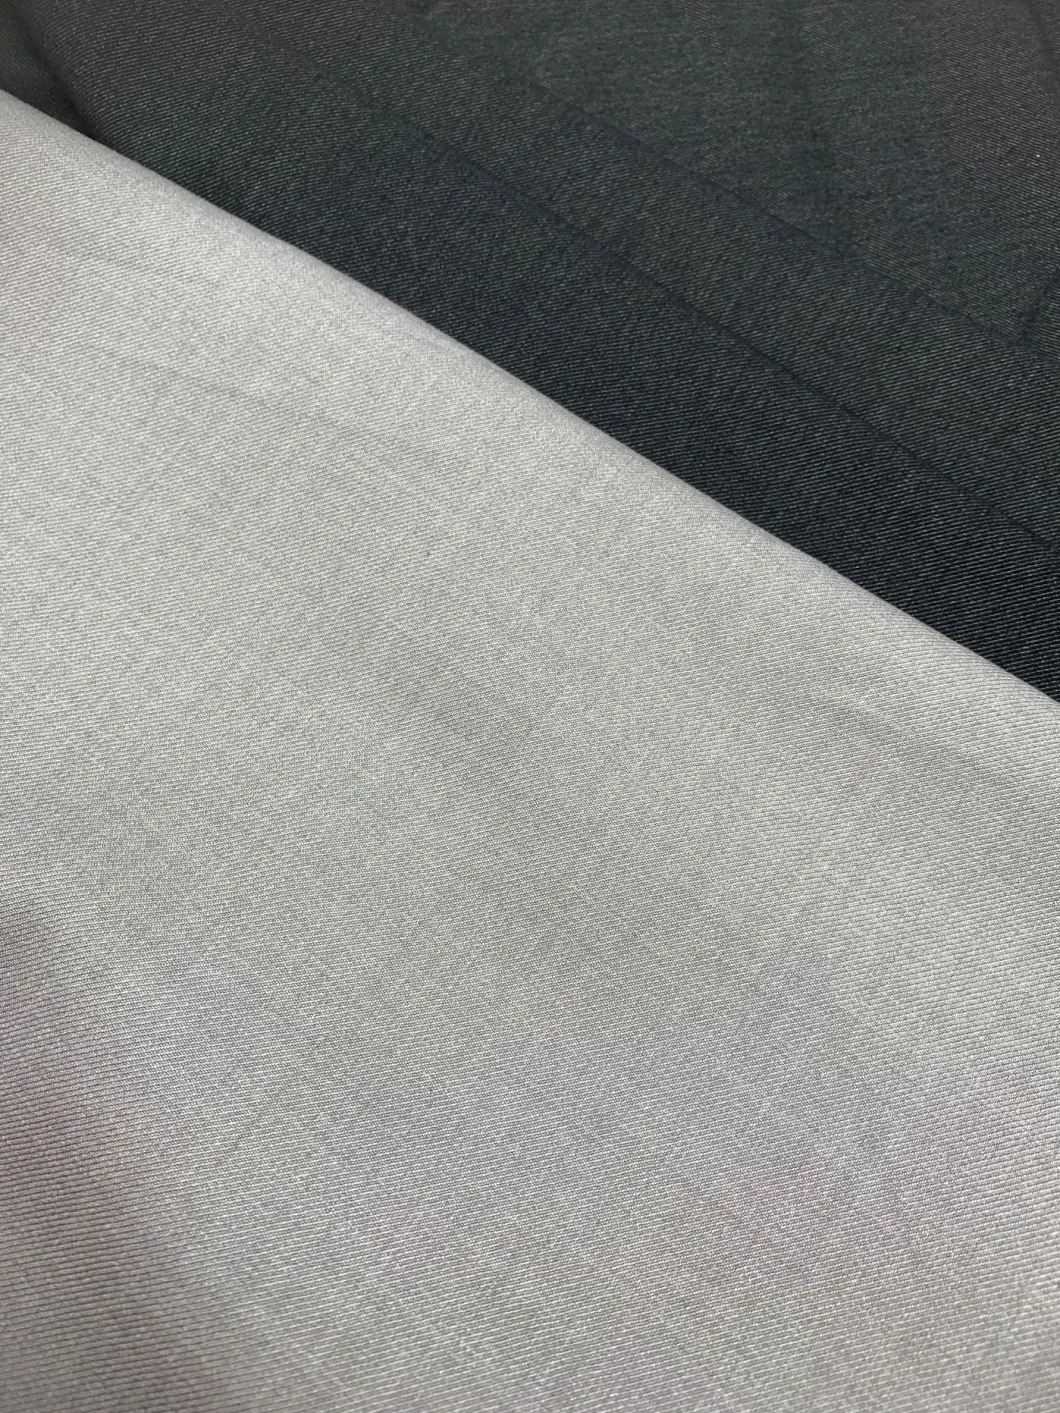 Tr Suiting Fabric for Workwear and Ladies Men's Suit Fabric